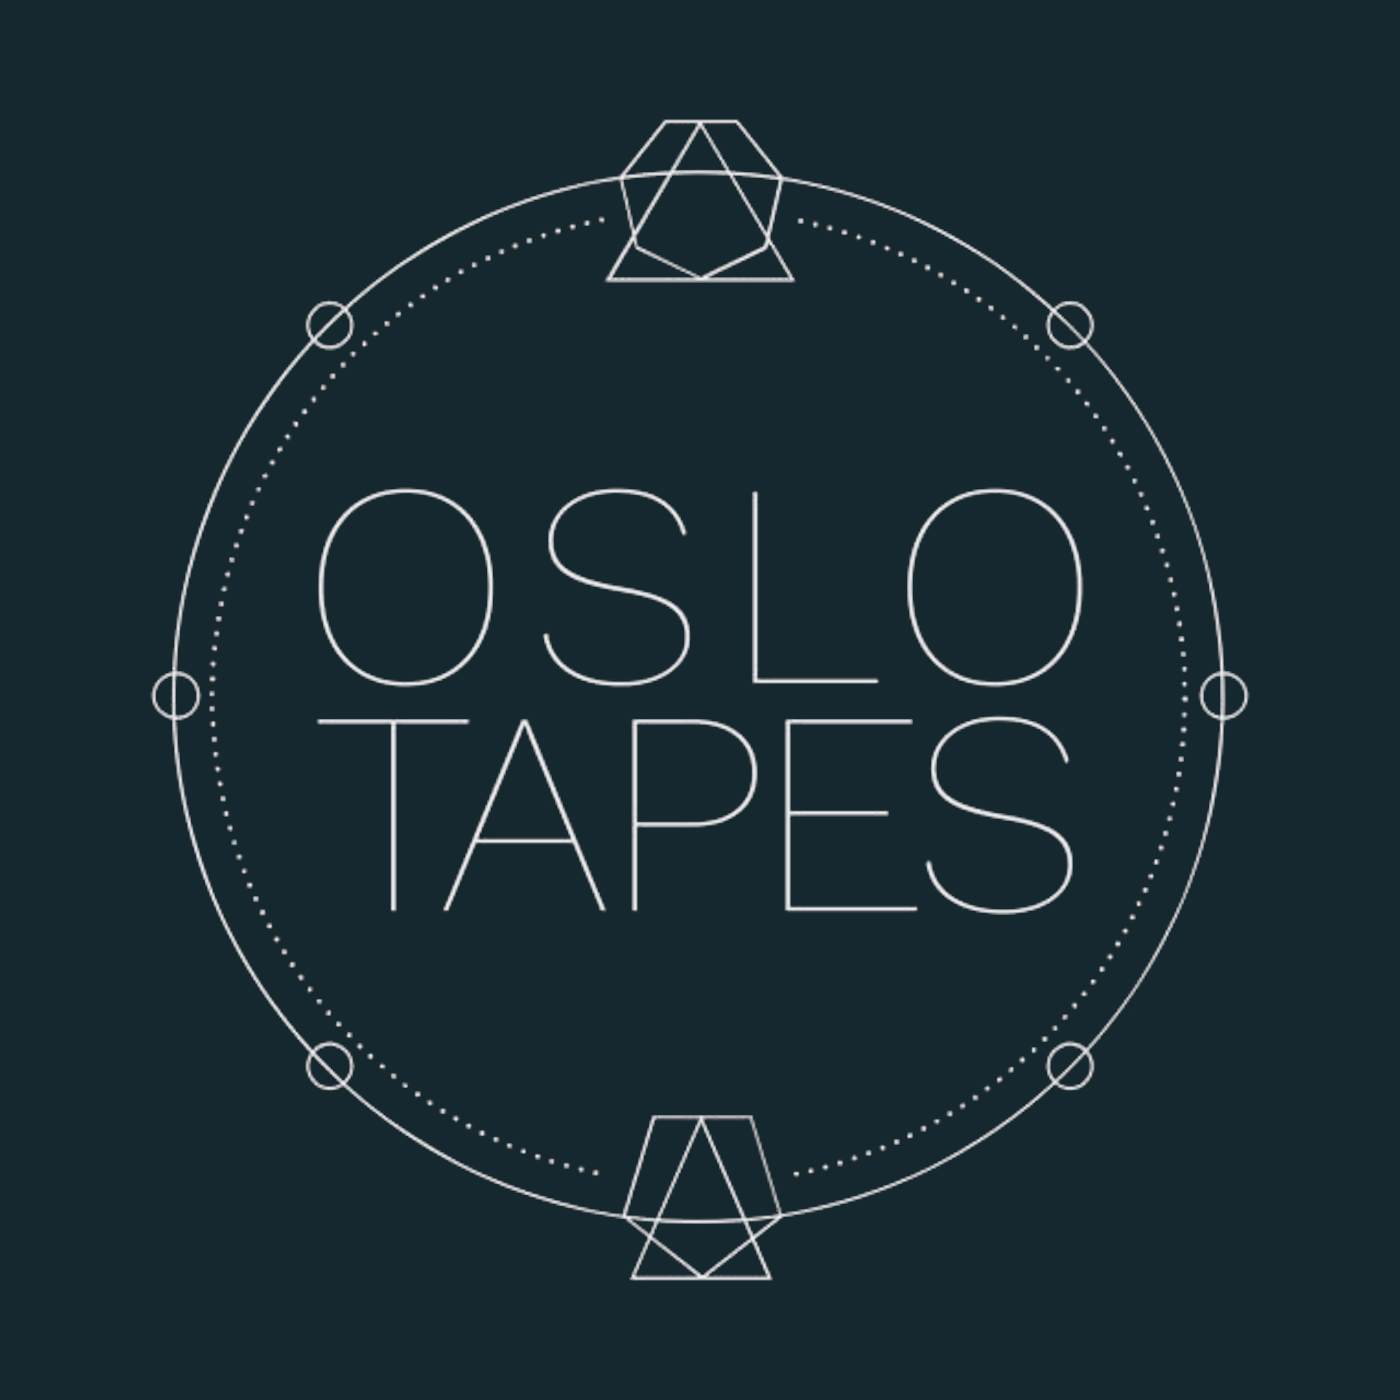 Oslo Tapes